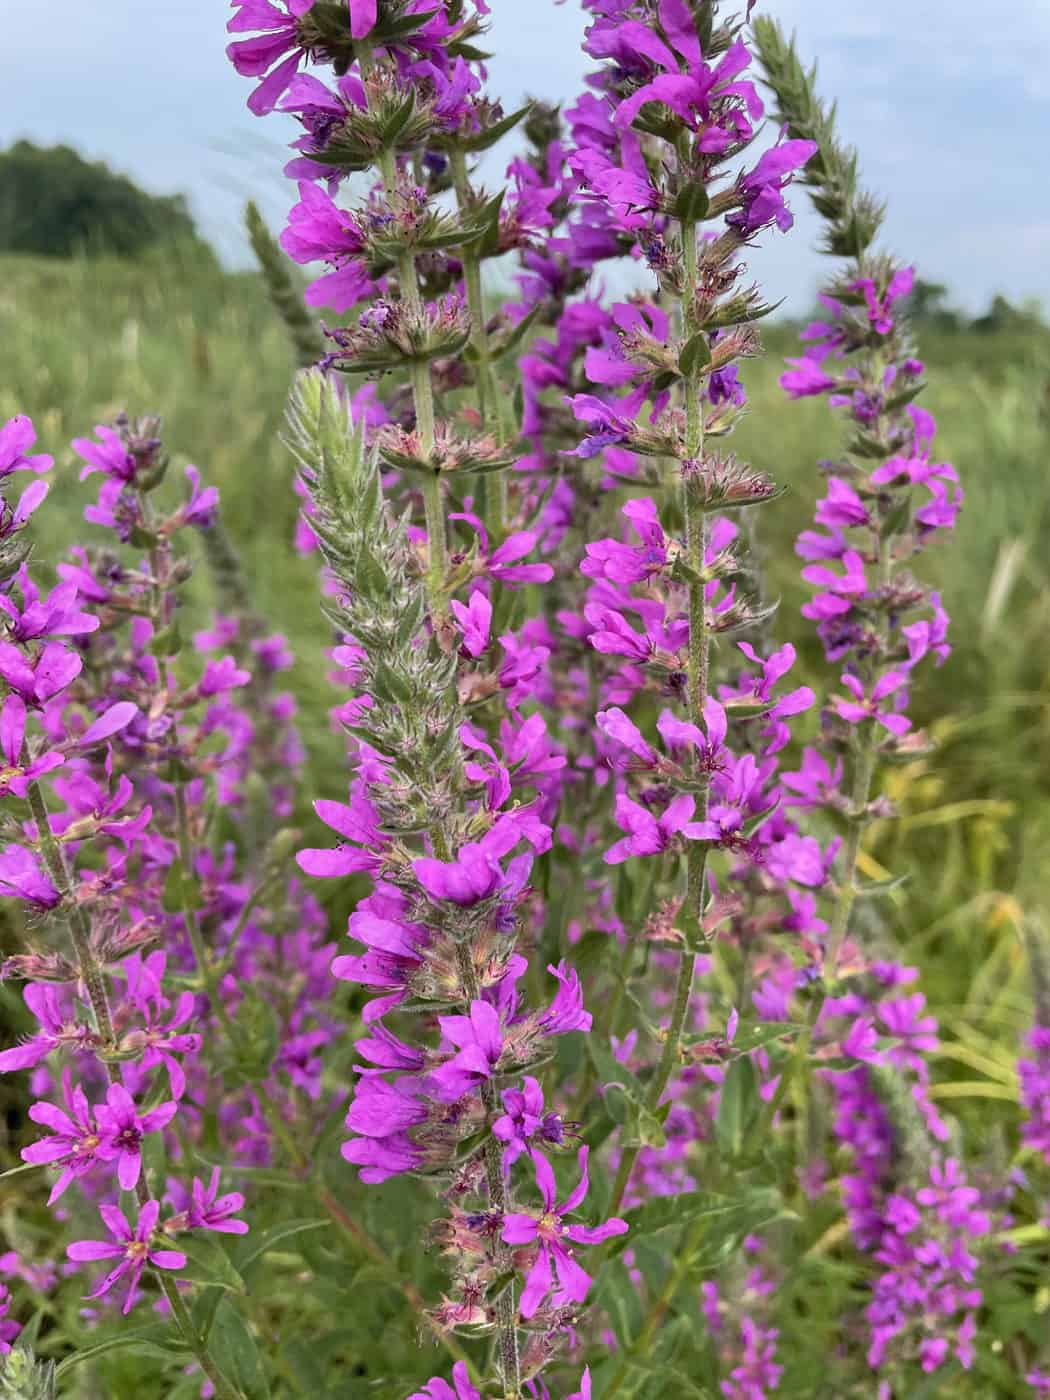 Bright pink-purple blooms of purple loosestrife in a field. Photo by Katie Sickmann.